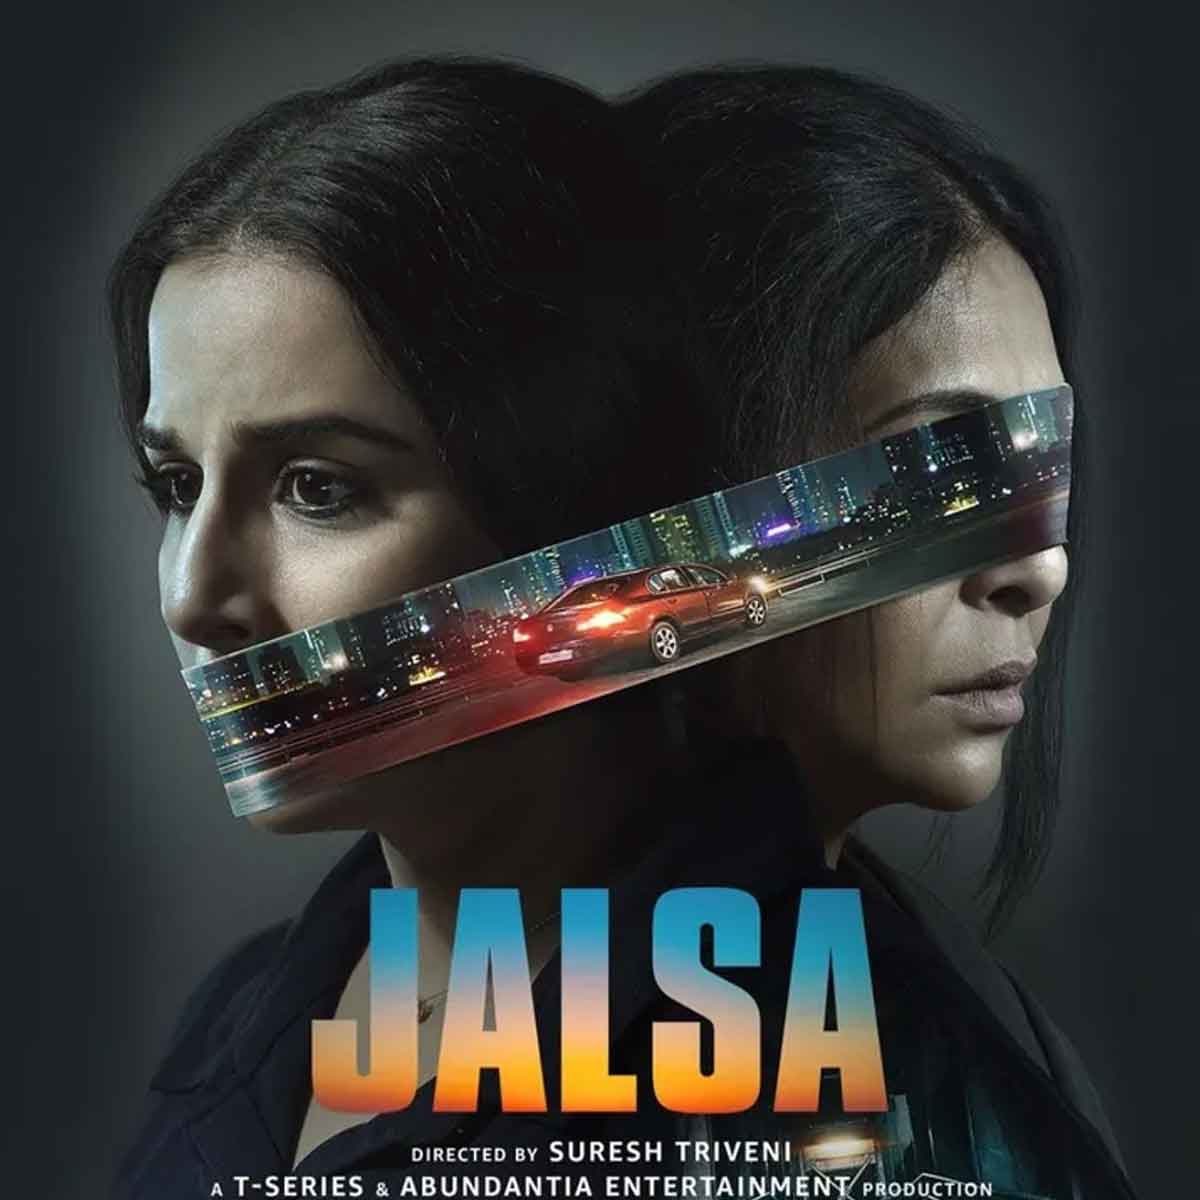 Jalsa Twitter Review: Here’s how the audience has reacted to Vidya Balan, Shefali Shah starrer